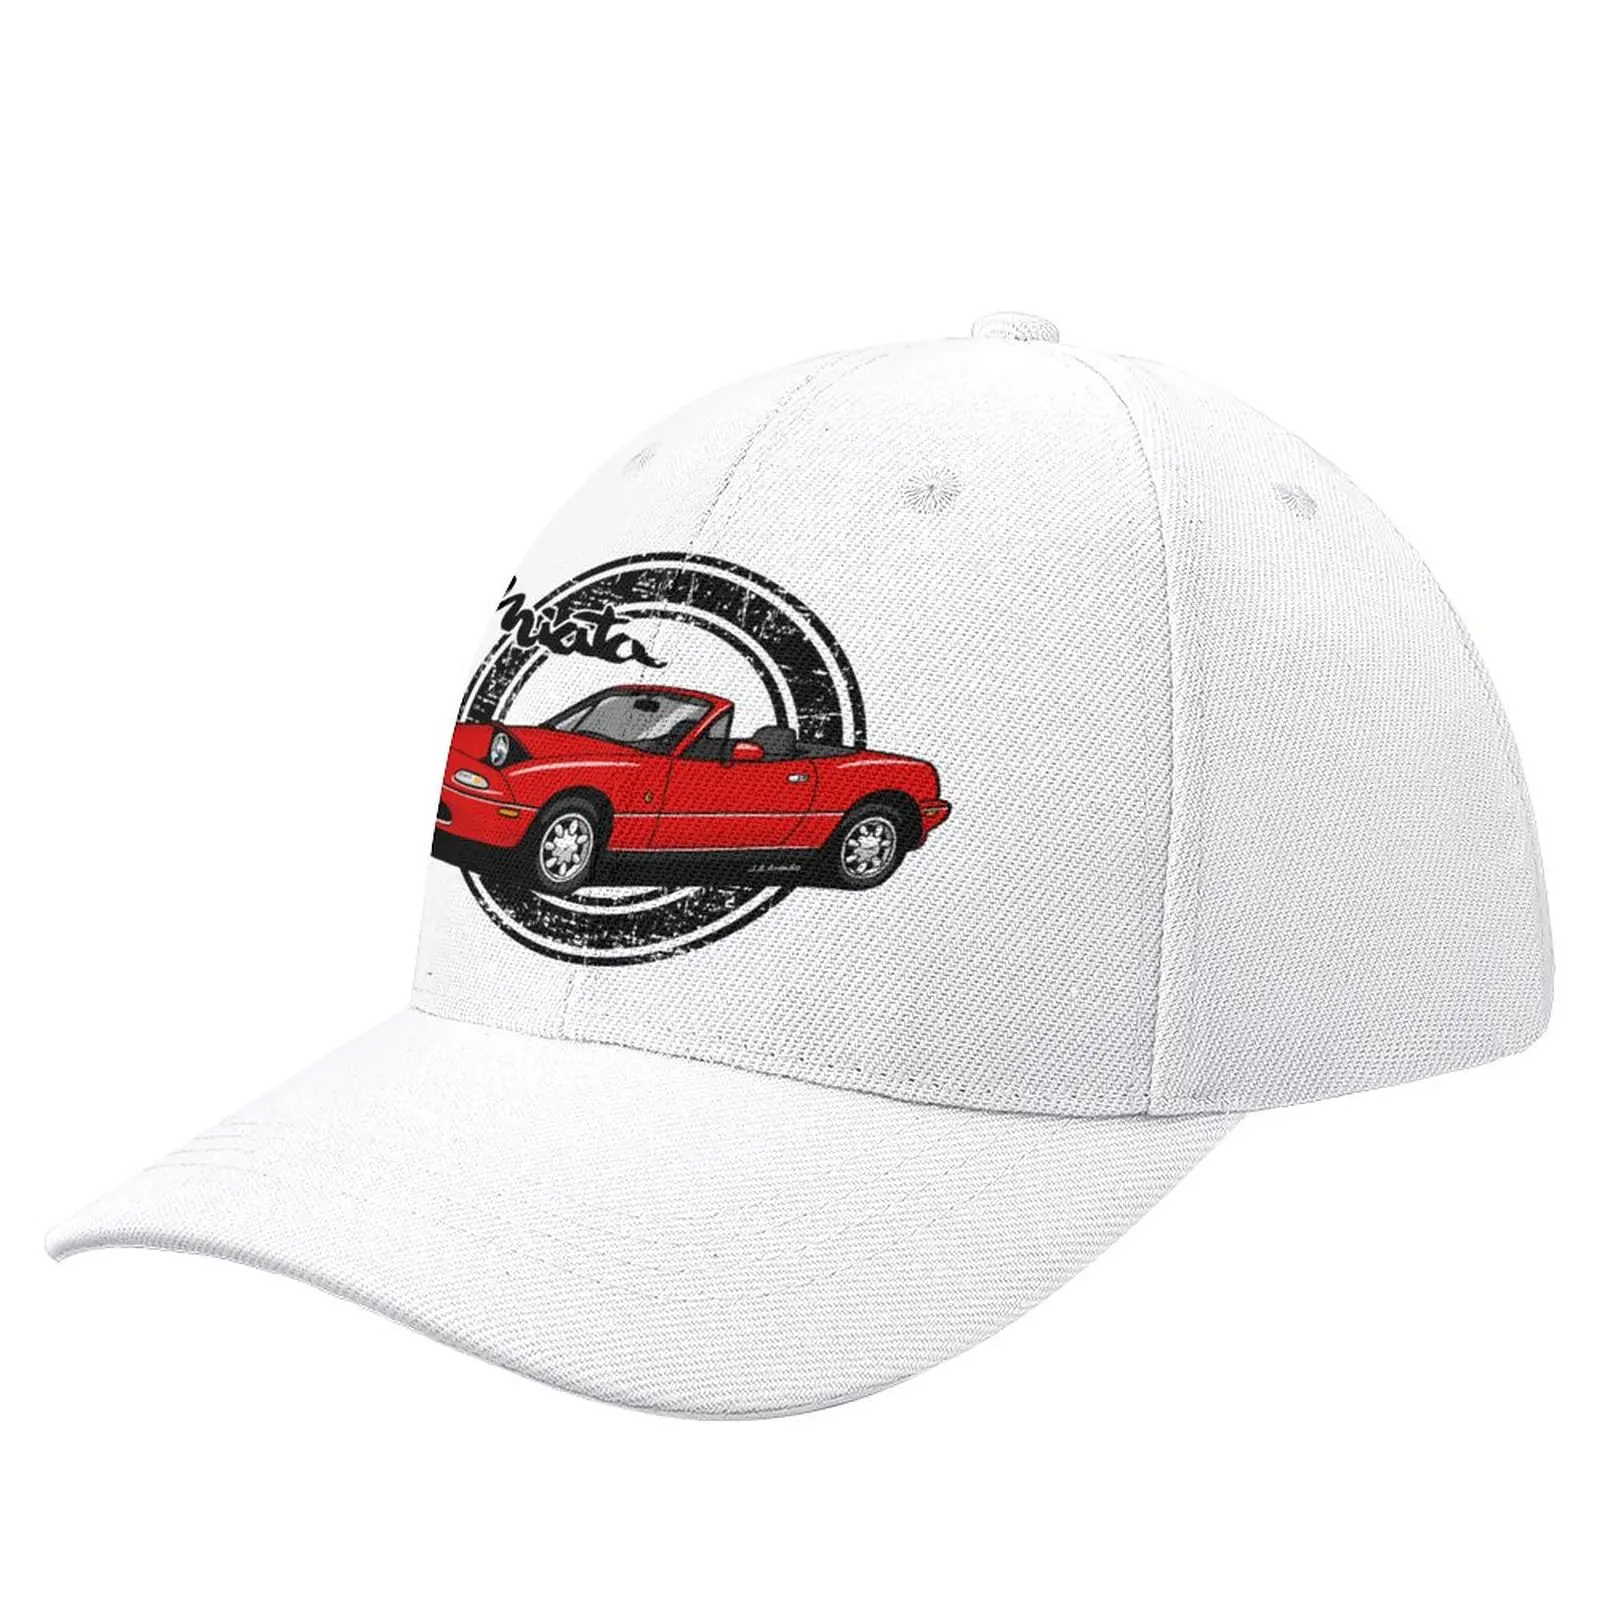 

My drawing of the red Japanese roadster Baseball Cap Military Tactical Caps Fluffy Hat Women'S Golf Clothing Men'S